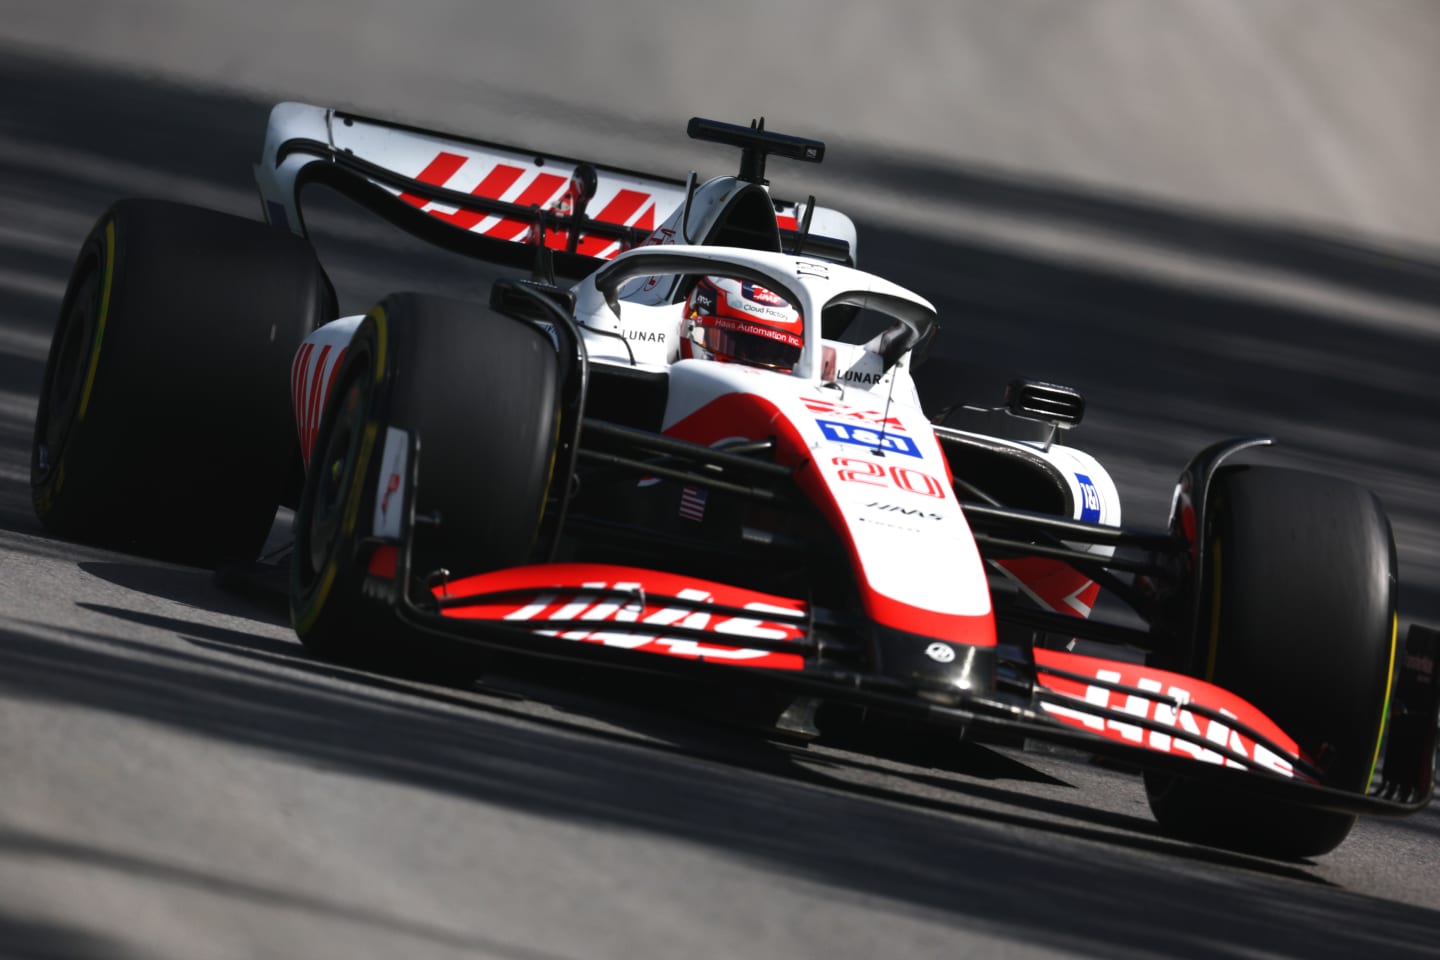 MONTREAL, QUEBEC - JUNE 17: Kevin Magnussen of Denmark driving the (20) Haas F1 VF-22 Ferrari on track during practice ahead of the F1 Grand Prix of Canada at Circuit Gilles Villeneuve on June 17, 2022 in Montreal, Quebec. (Photo by Clive Rose/Getty Images)